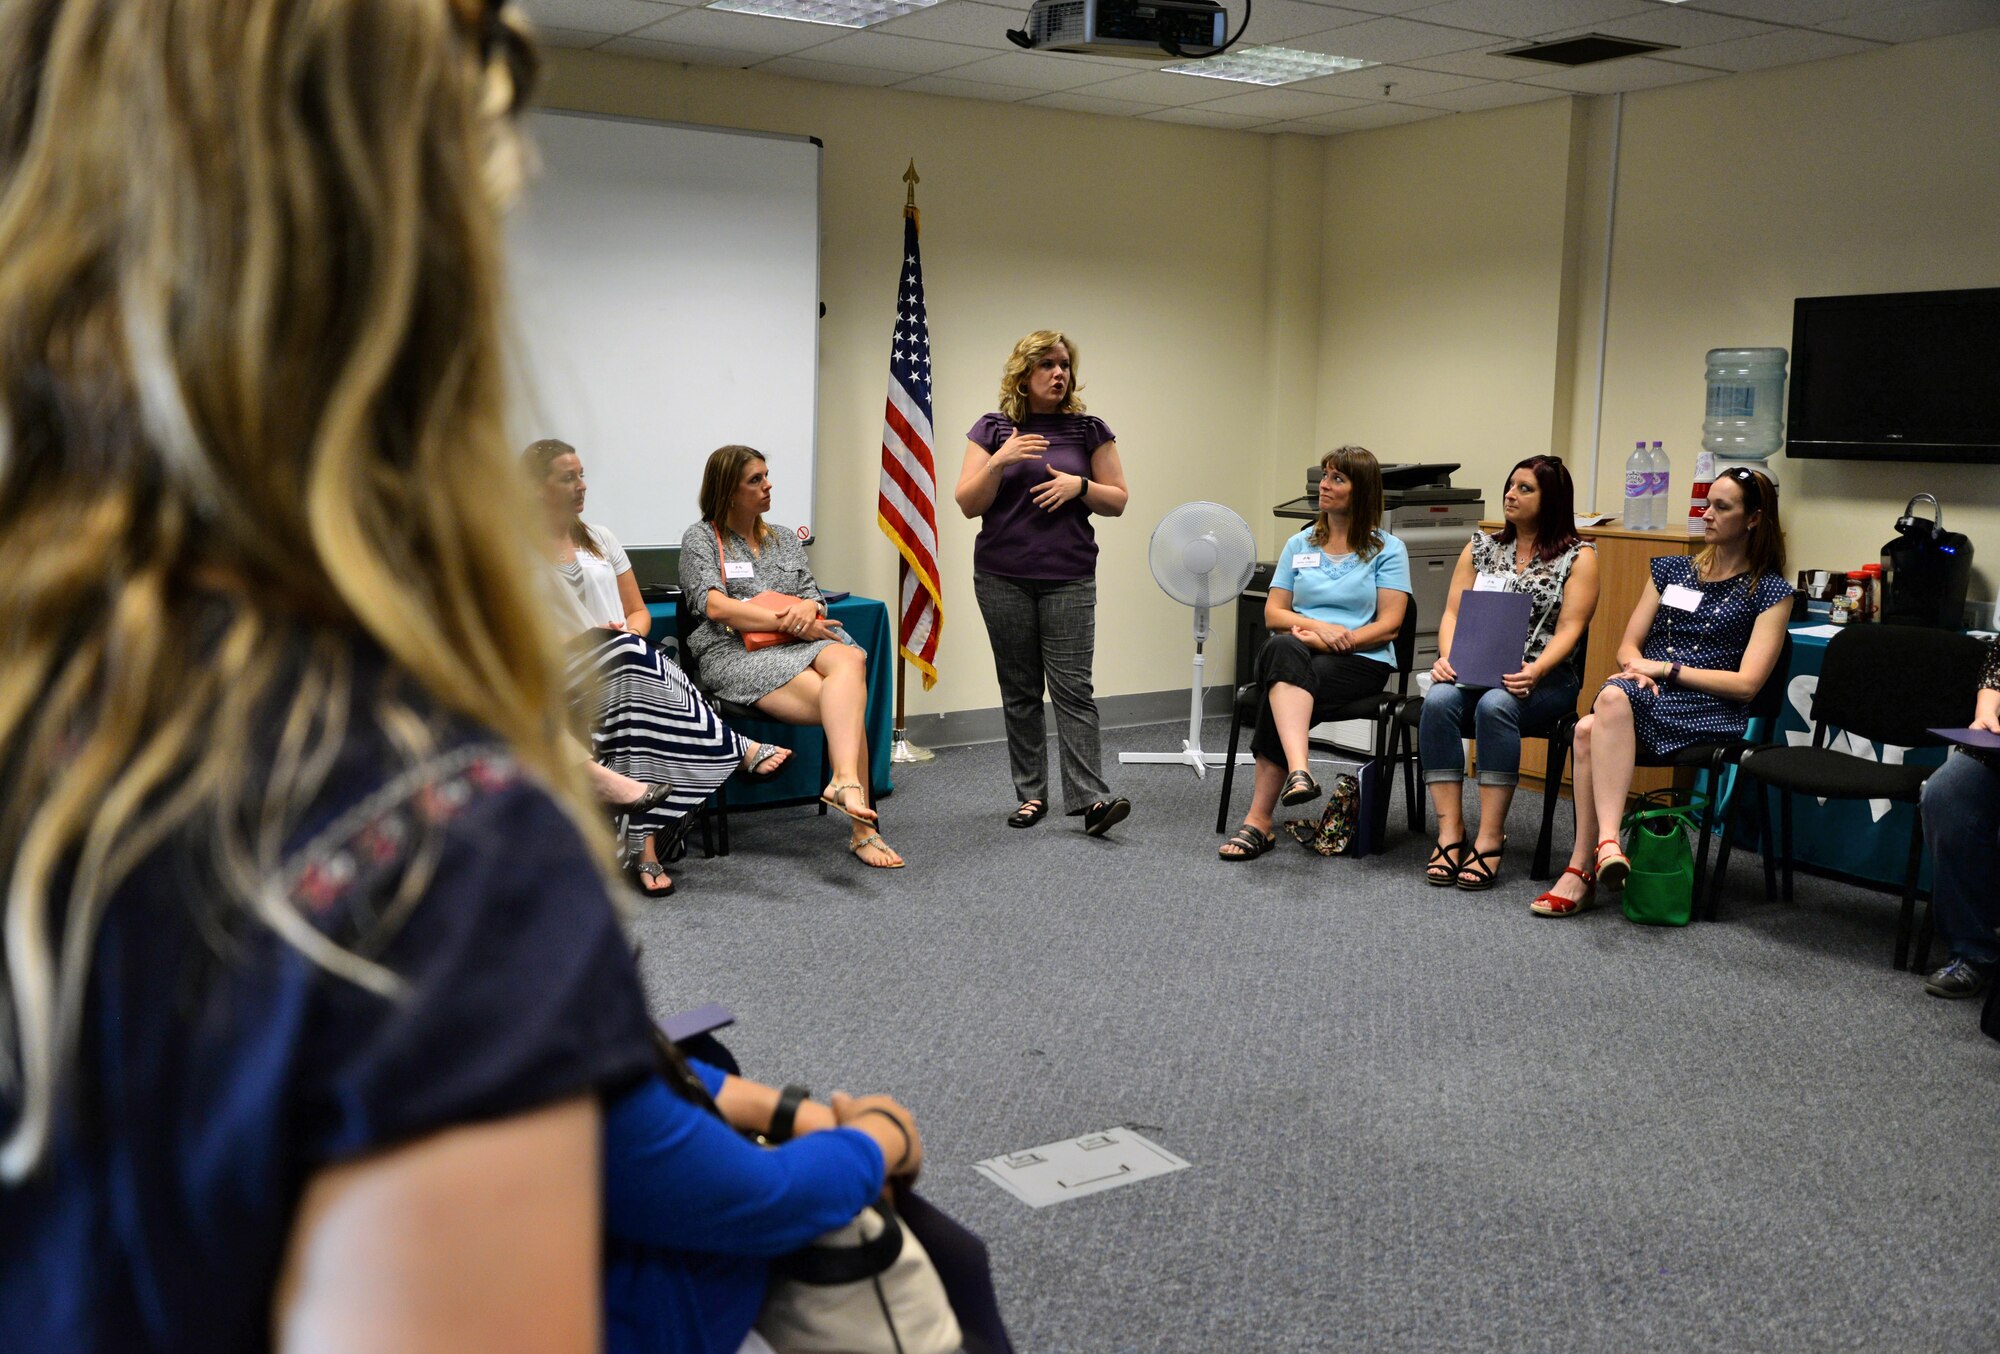 Genevieve Brock, 100th Air Refueling Wing Sexual Assault Prevention and Response victim advocate, briefs Team Mildenhall spouses Sept. 8, 2016, on RAF Mildenhall, England. The Spouse Immersion Tour gave Team Mildenhall spouses an opportunity to network and gain a better understanding of programs and facilities on base. (U.S. Air Force photo by Senior Airman Christine Halan)